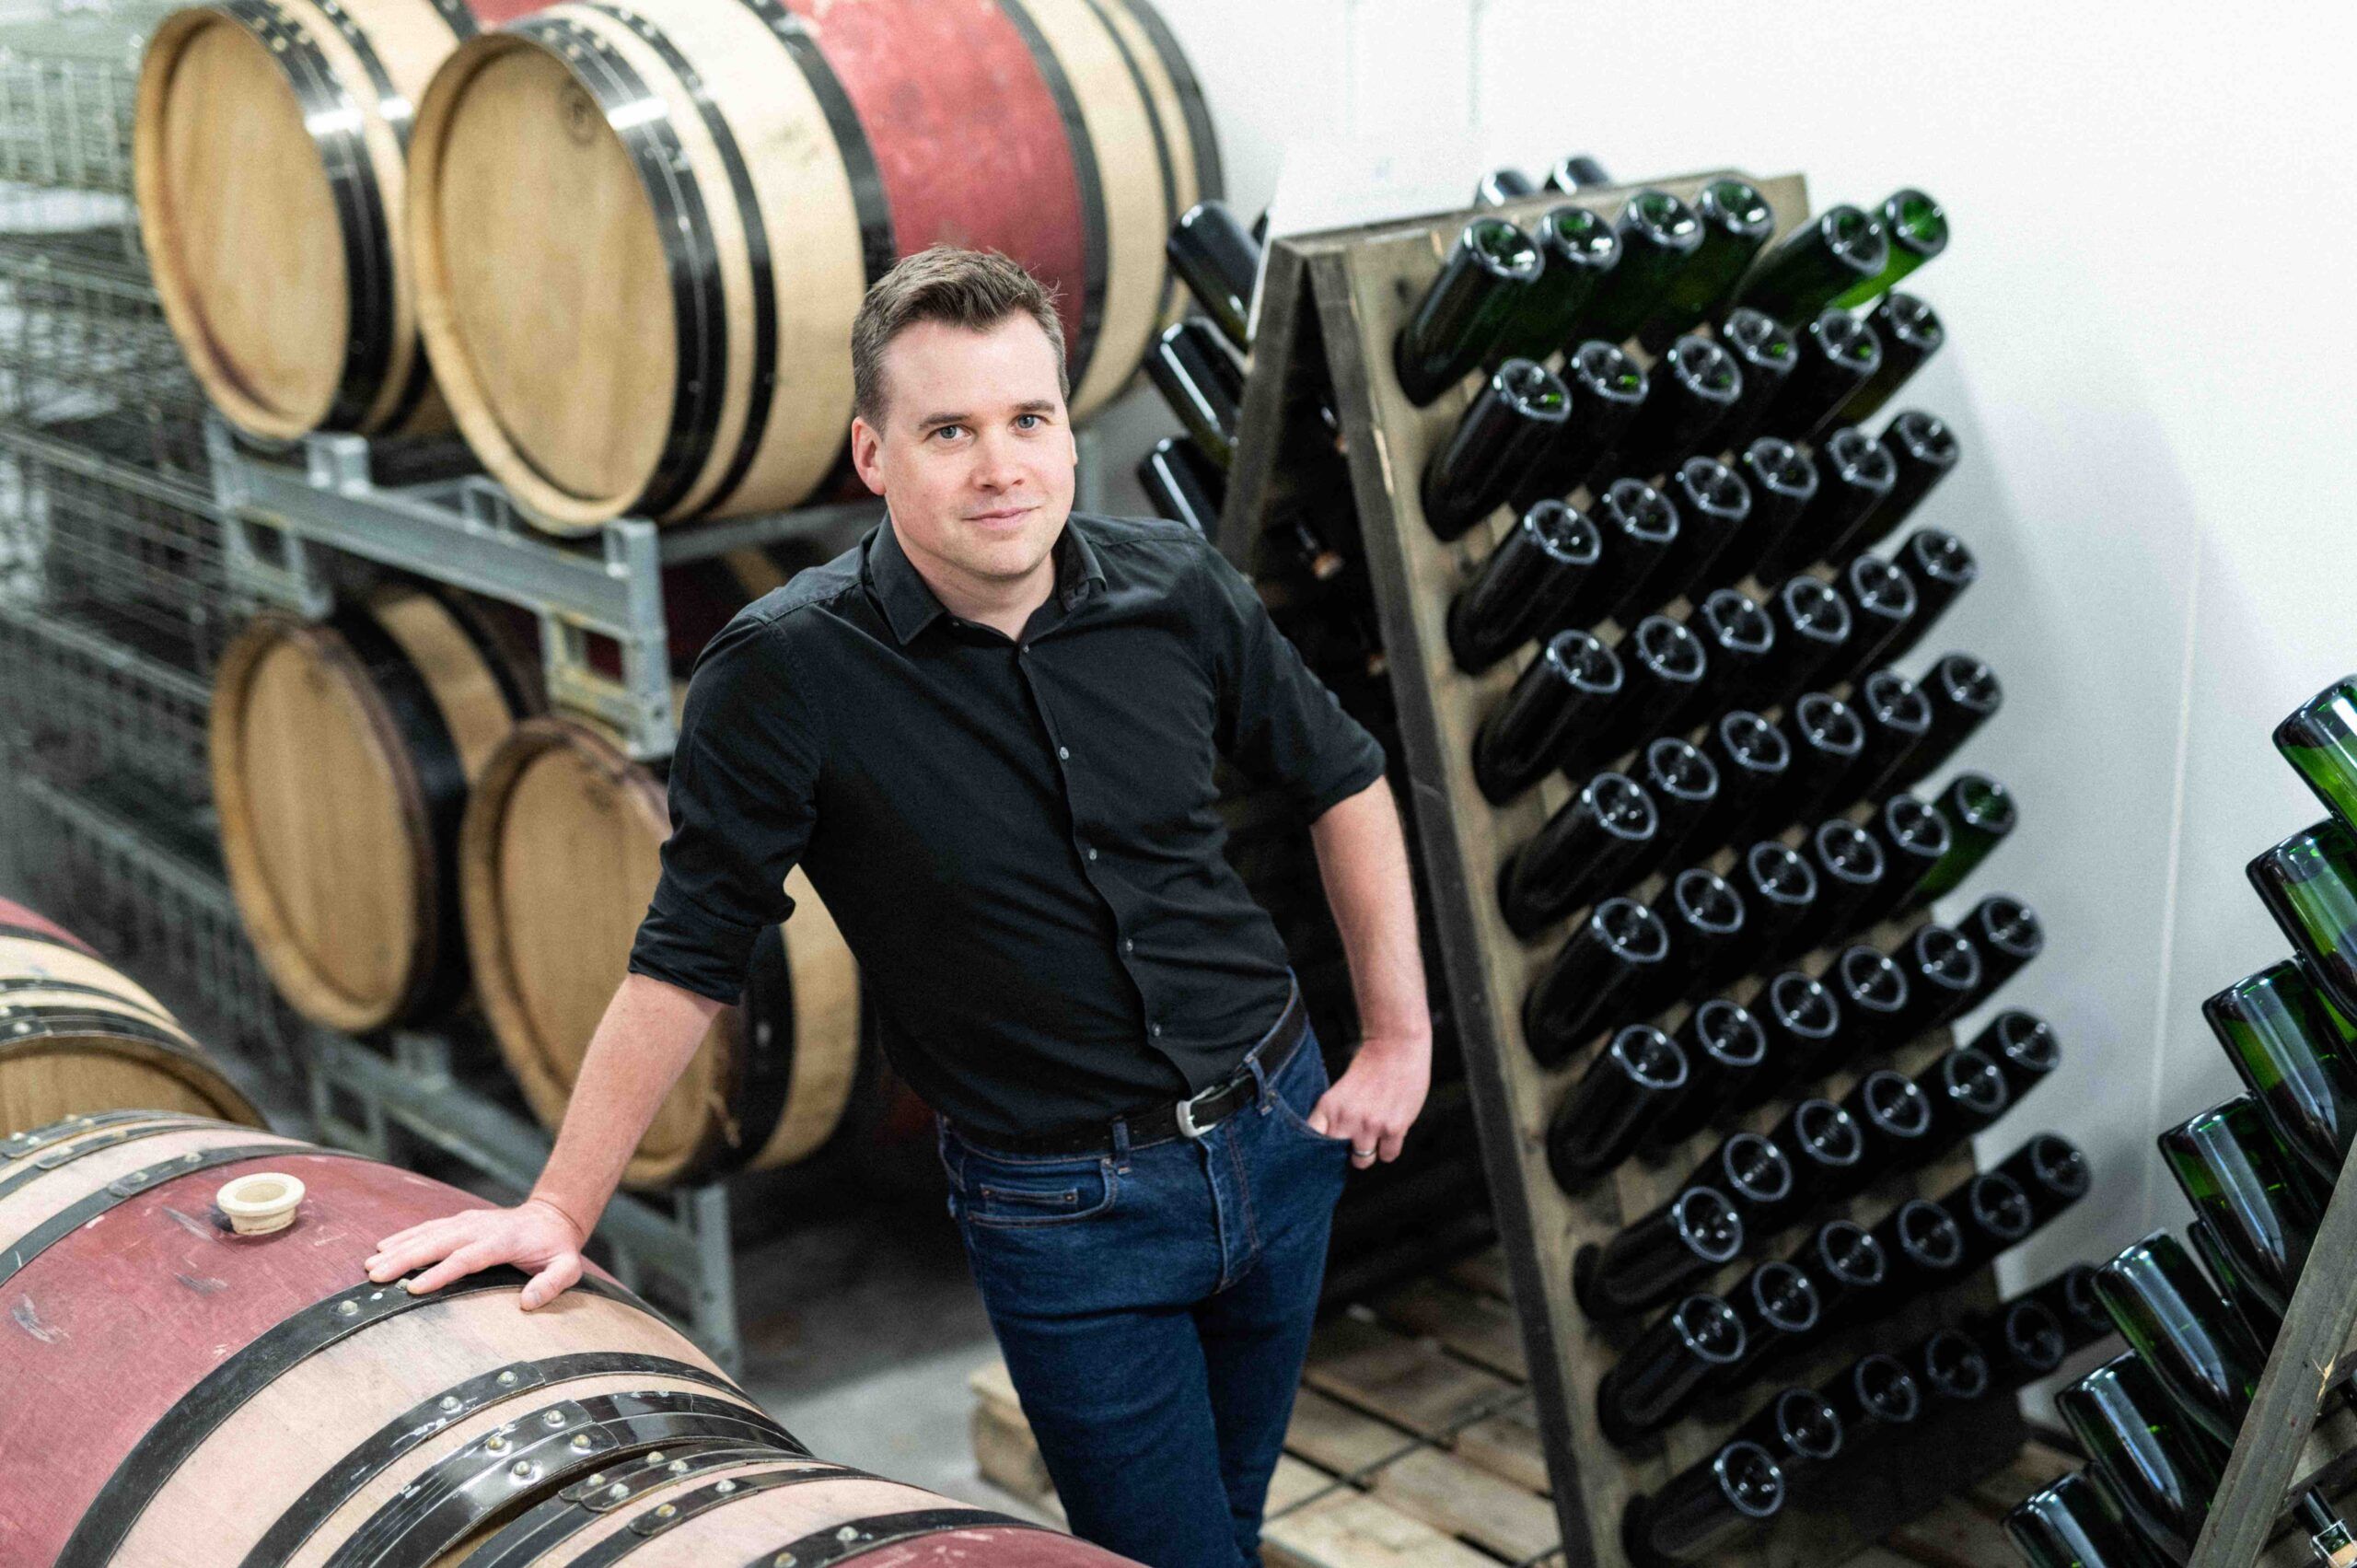 Lyme Bay Winery on leading the way for quality English still wines